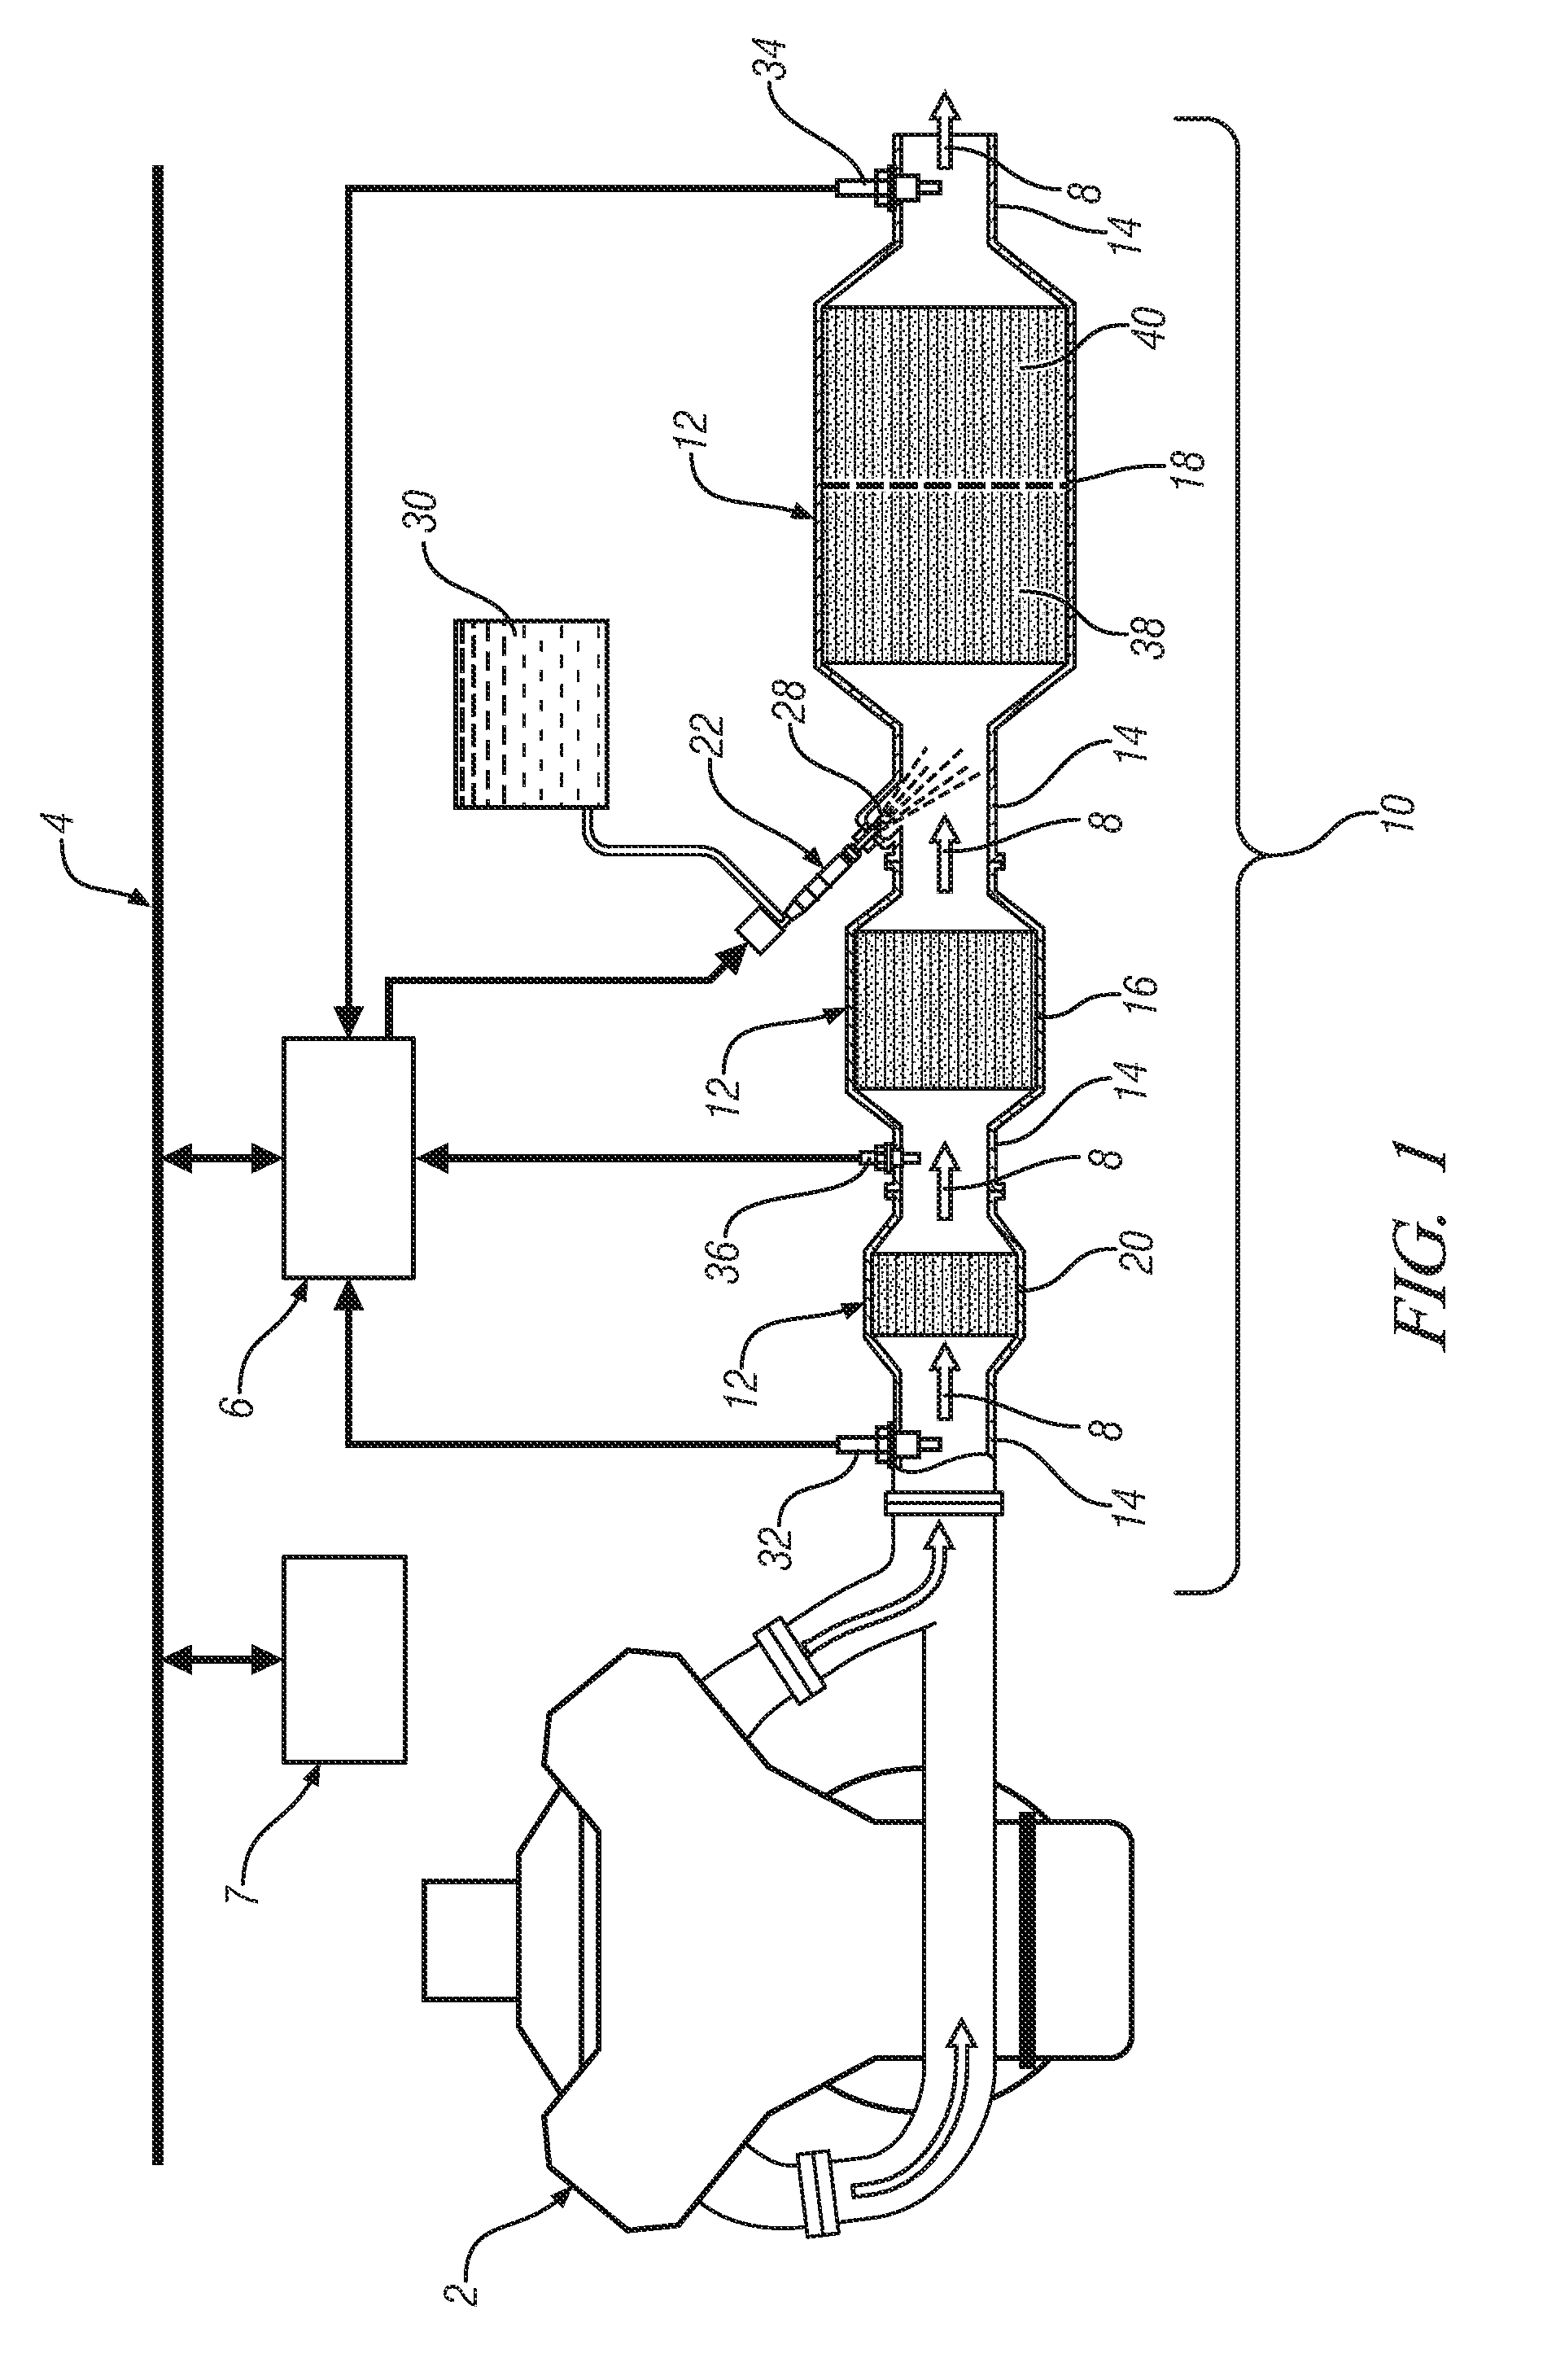 Exhaust Gas Treatment System Including an HC-SCR and Two-way Catalyst and Method of Using the Same